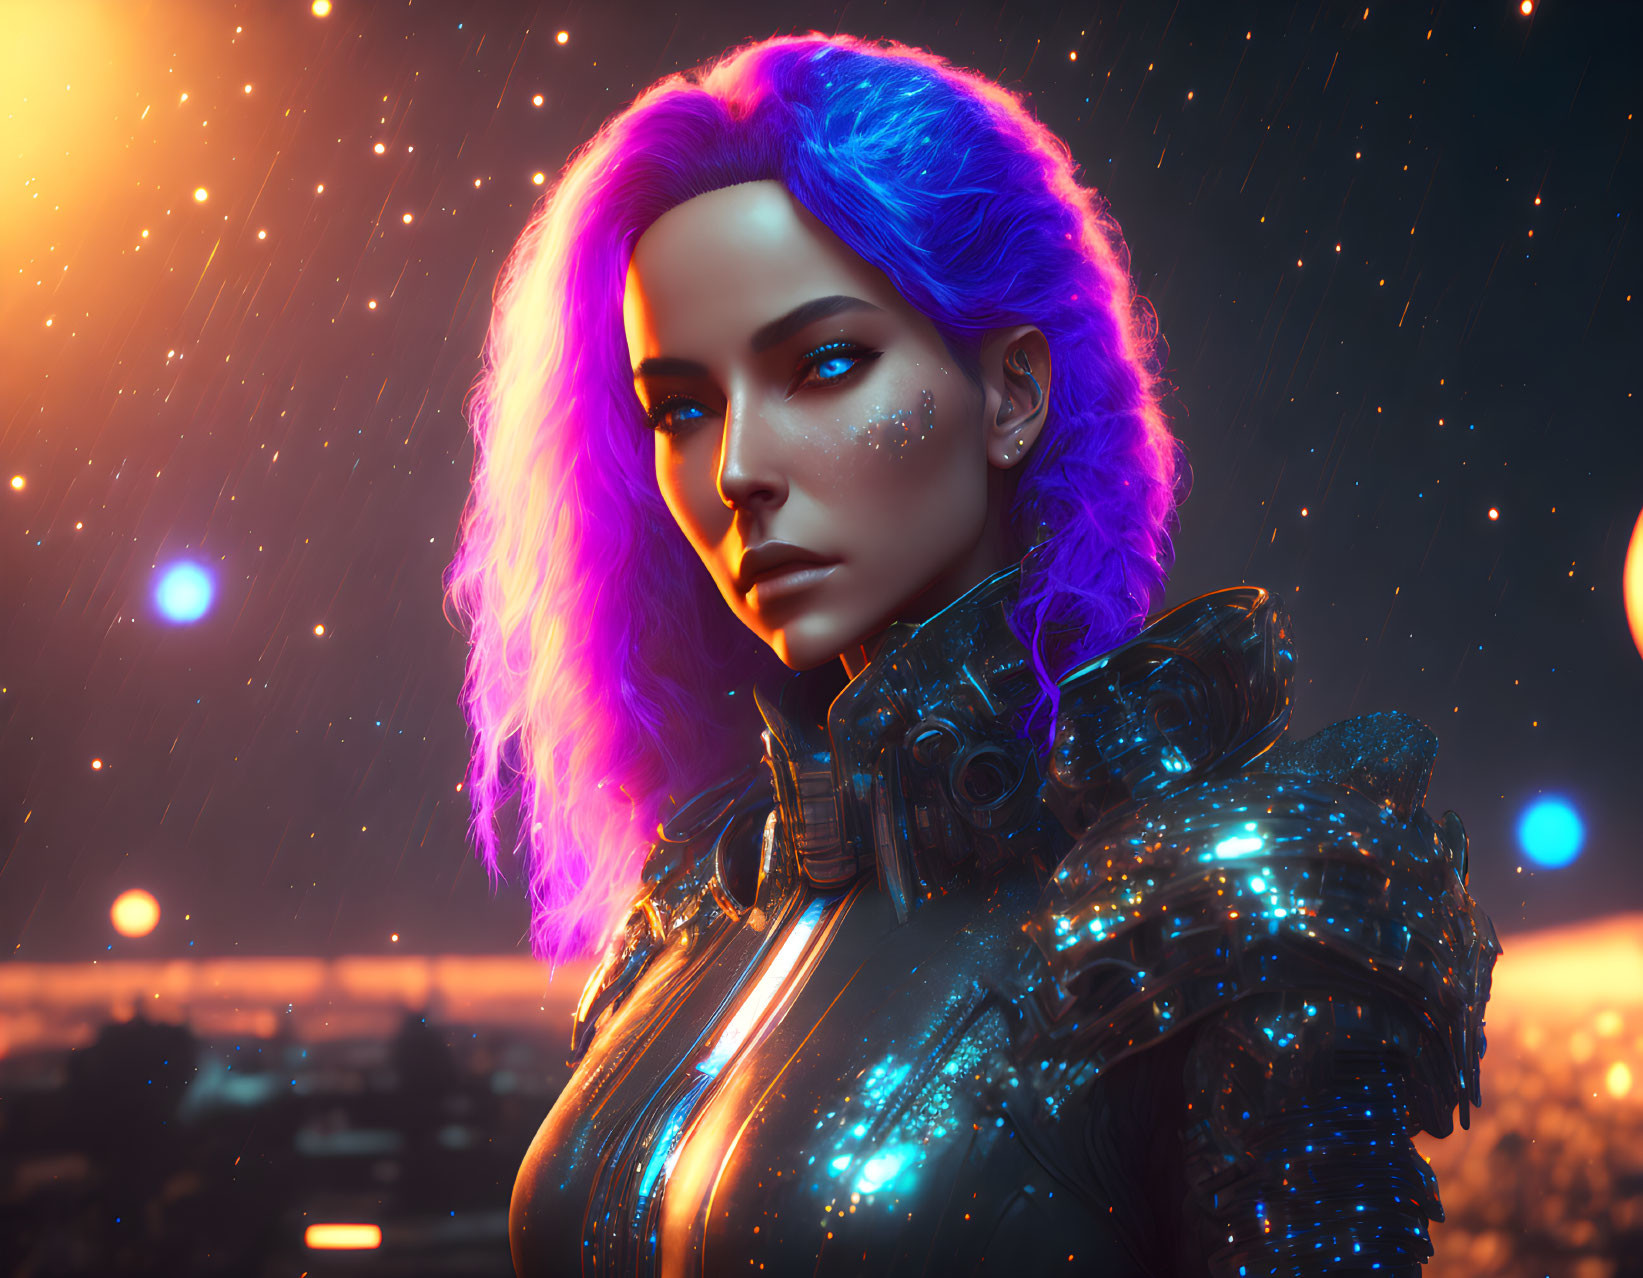 Woman with Blue and Purple Hair in Futuristic Armor on Sparkling Background